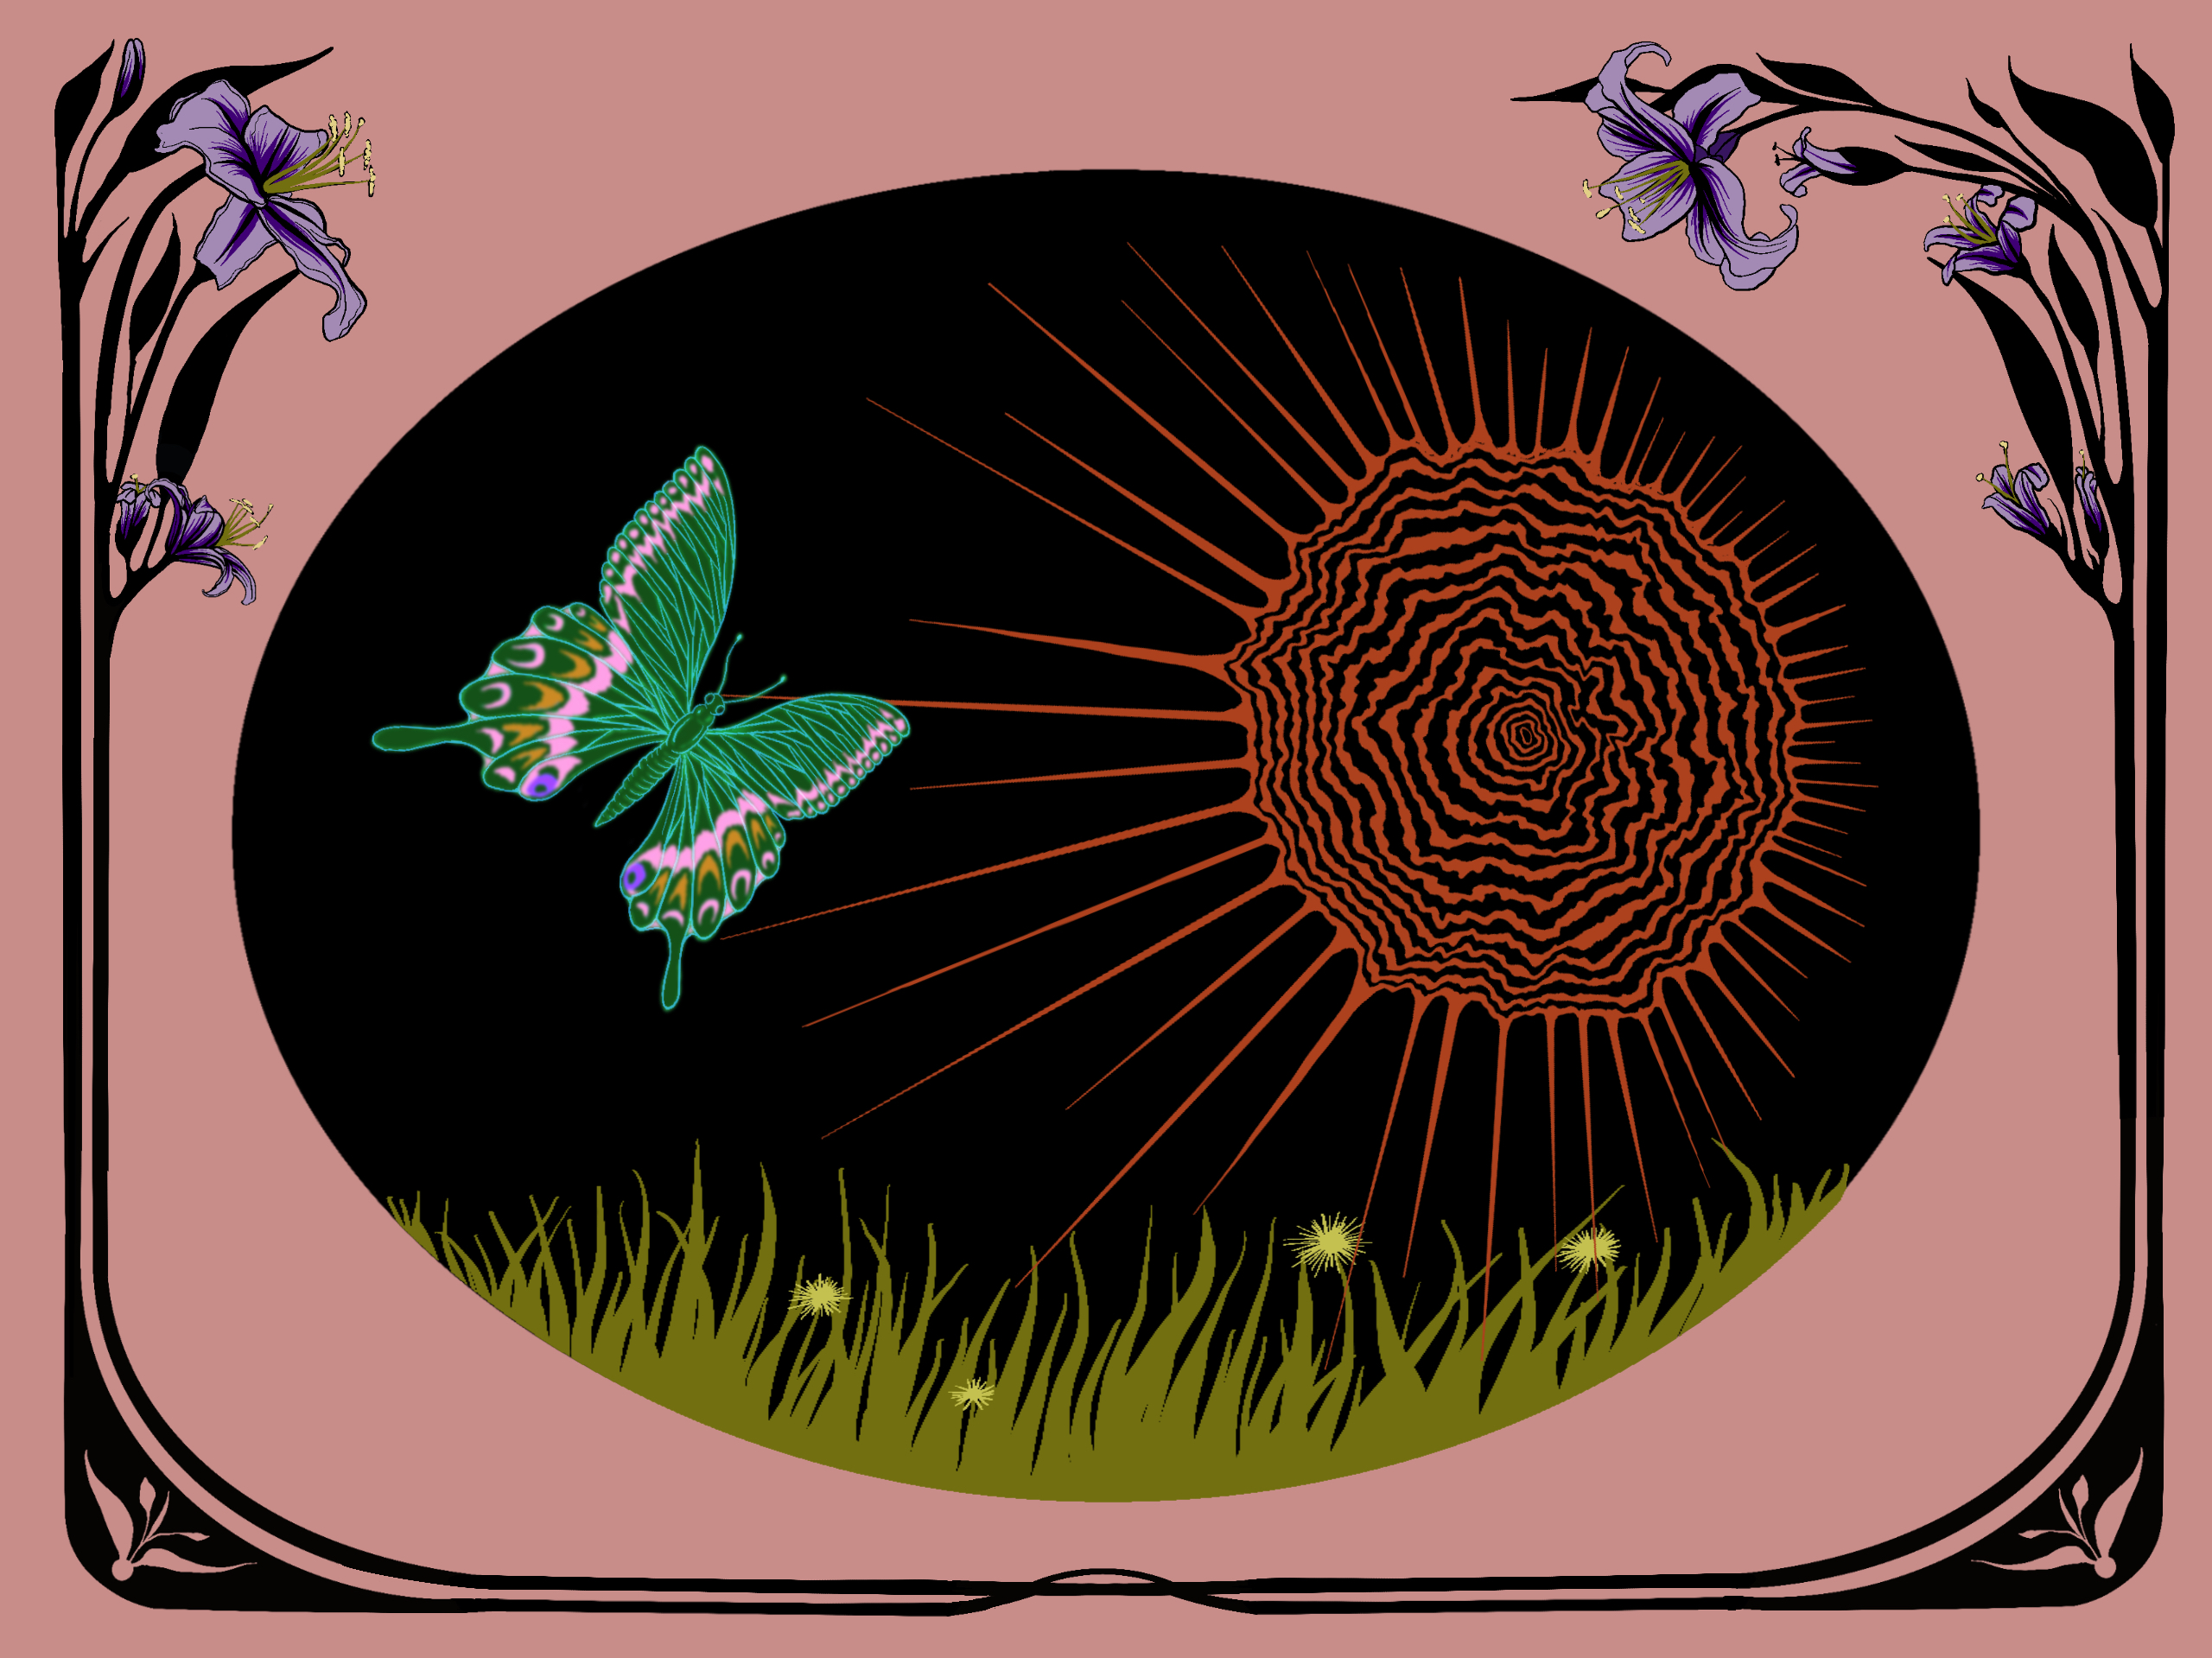 Image: A pink background, framed along the right, left and bottom by a black border giving the impression of wood, with purple flowers blooming off the crowns of it. In the center is a black oval containing a turquoise butterfly, a rusty brown sun, and gold-ish grass. Illustration by Summer Mills.